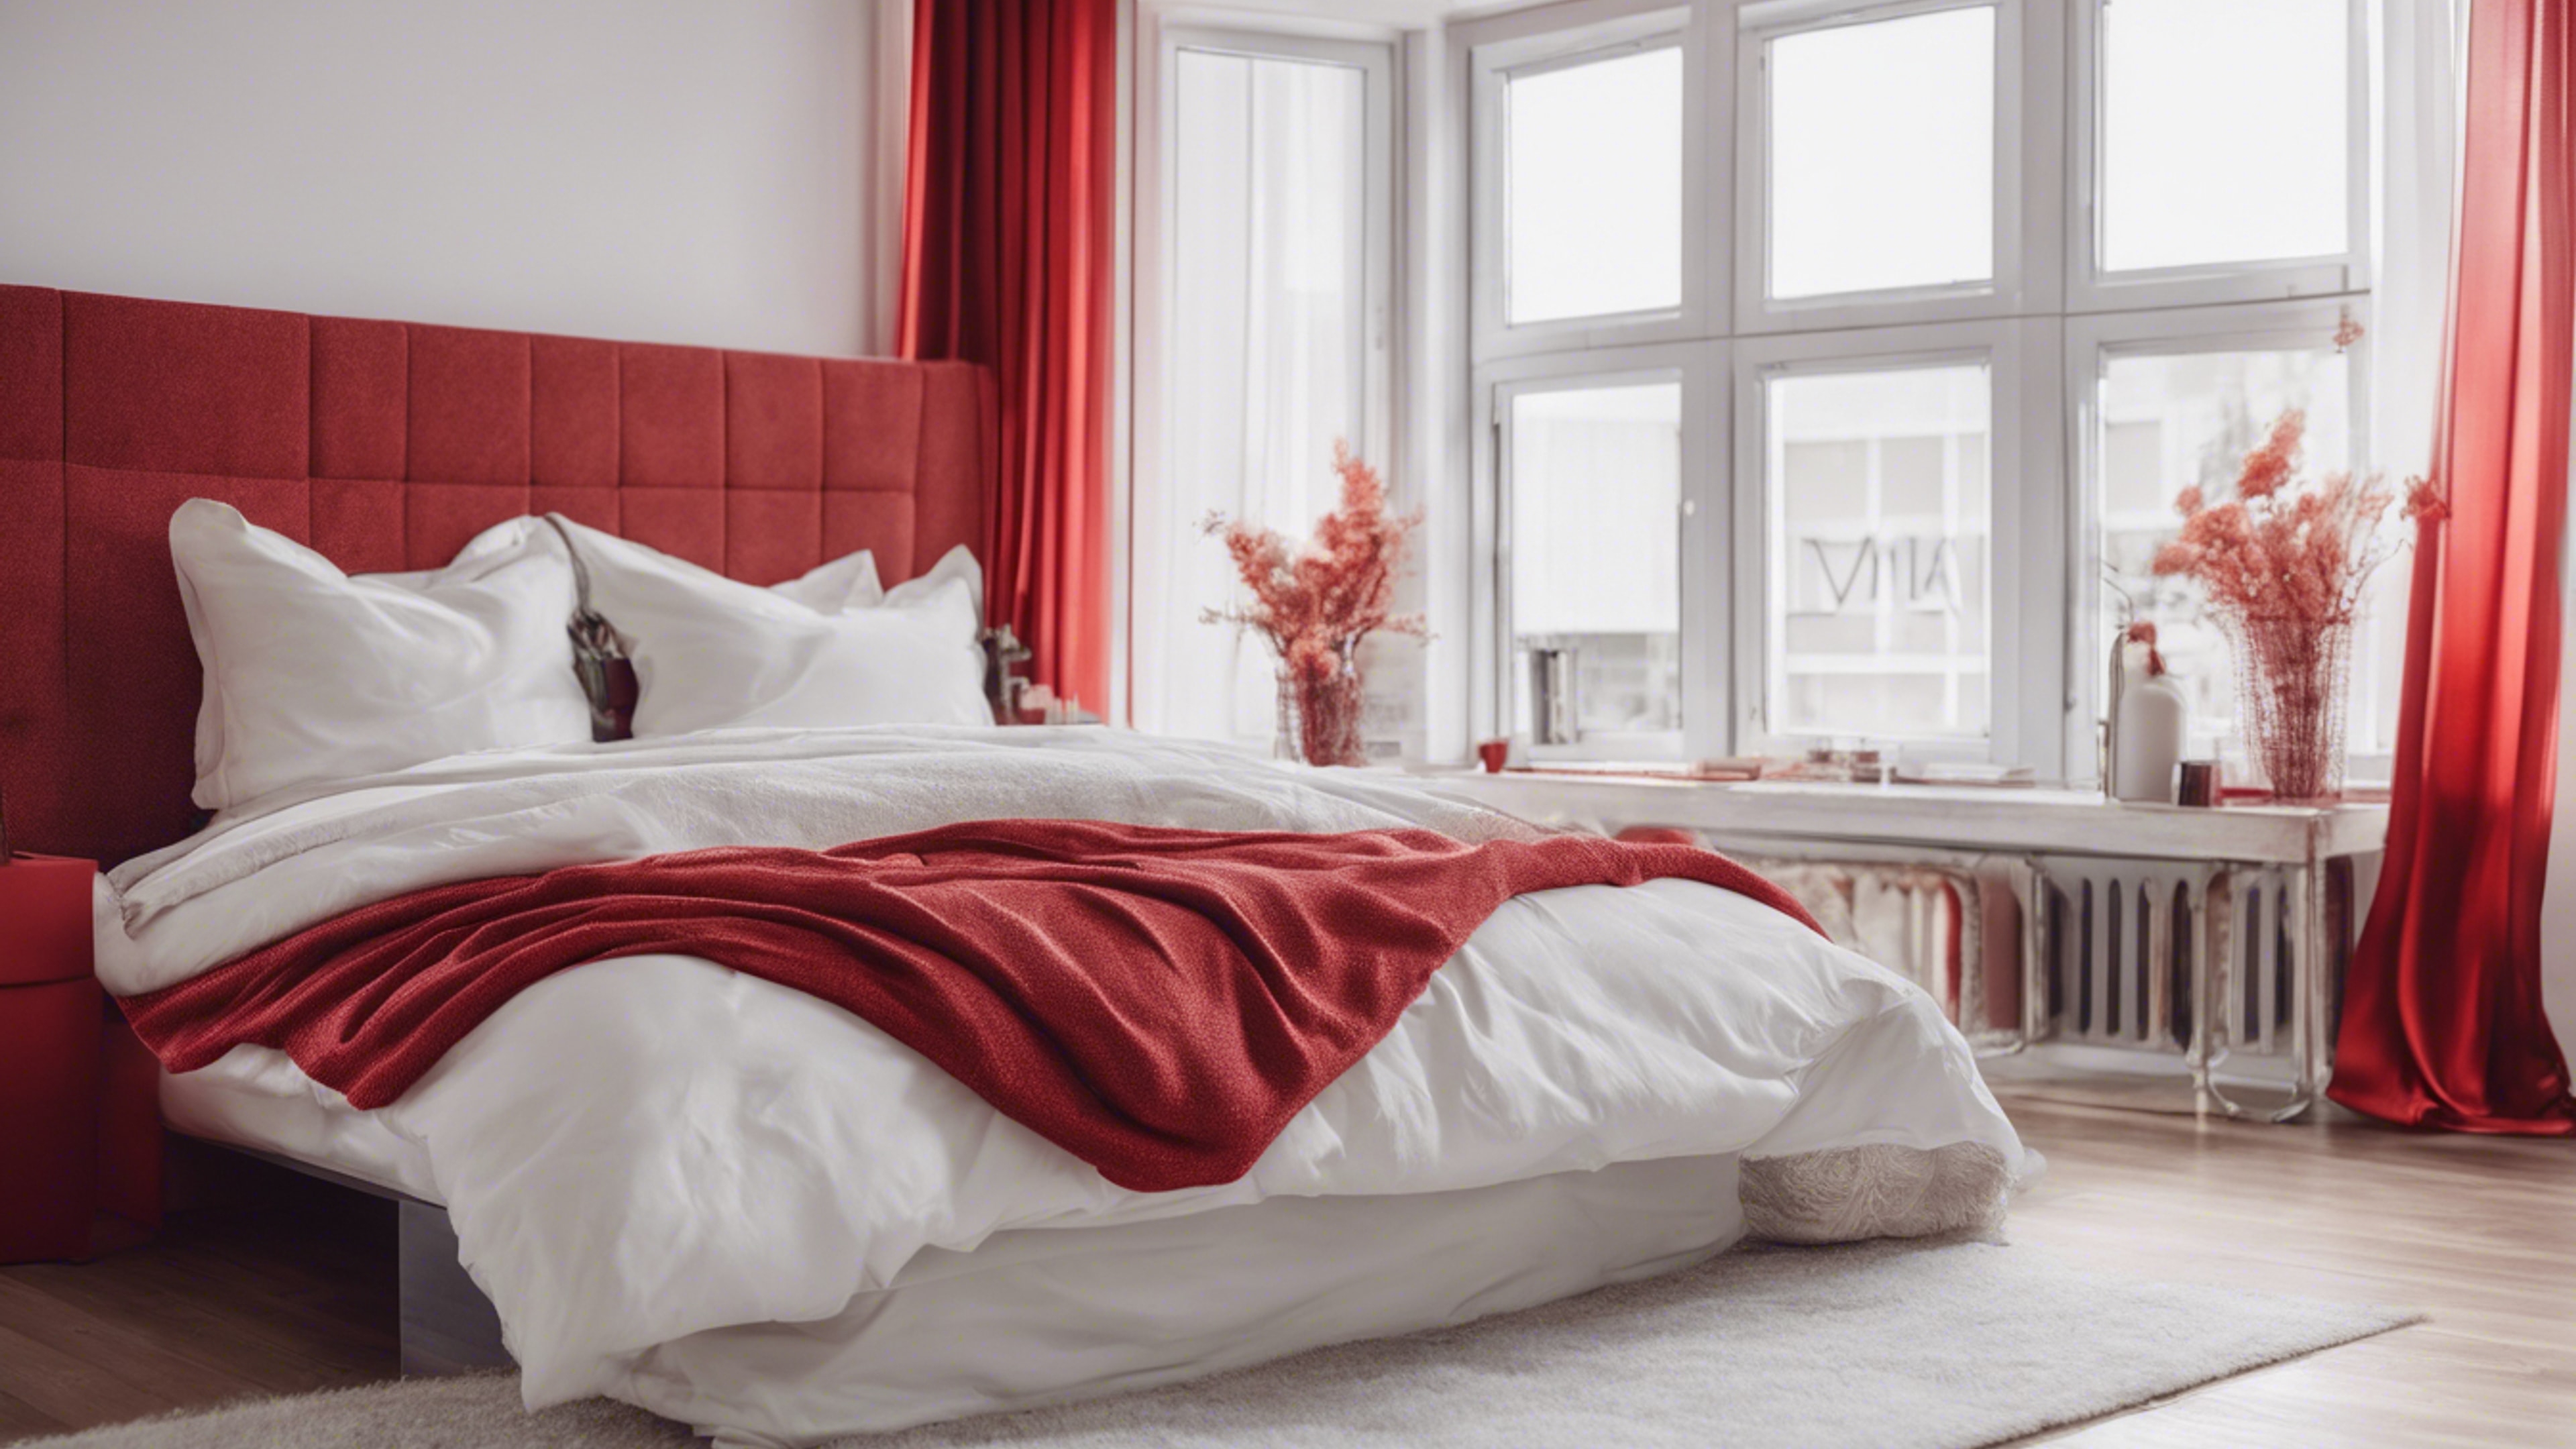 A contemporary bedroom decorated in minimalist red and white theme. کاغذ دیواری[ba3f34033fa9429b9d31]